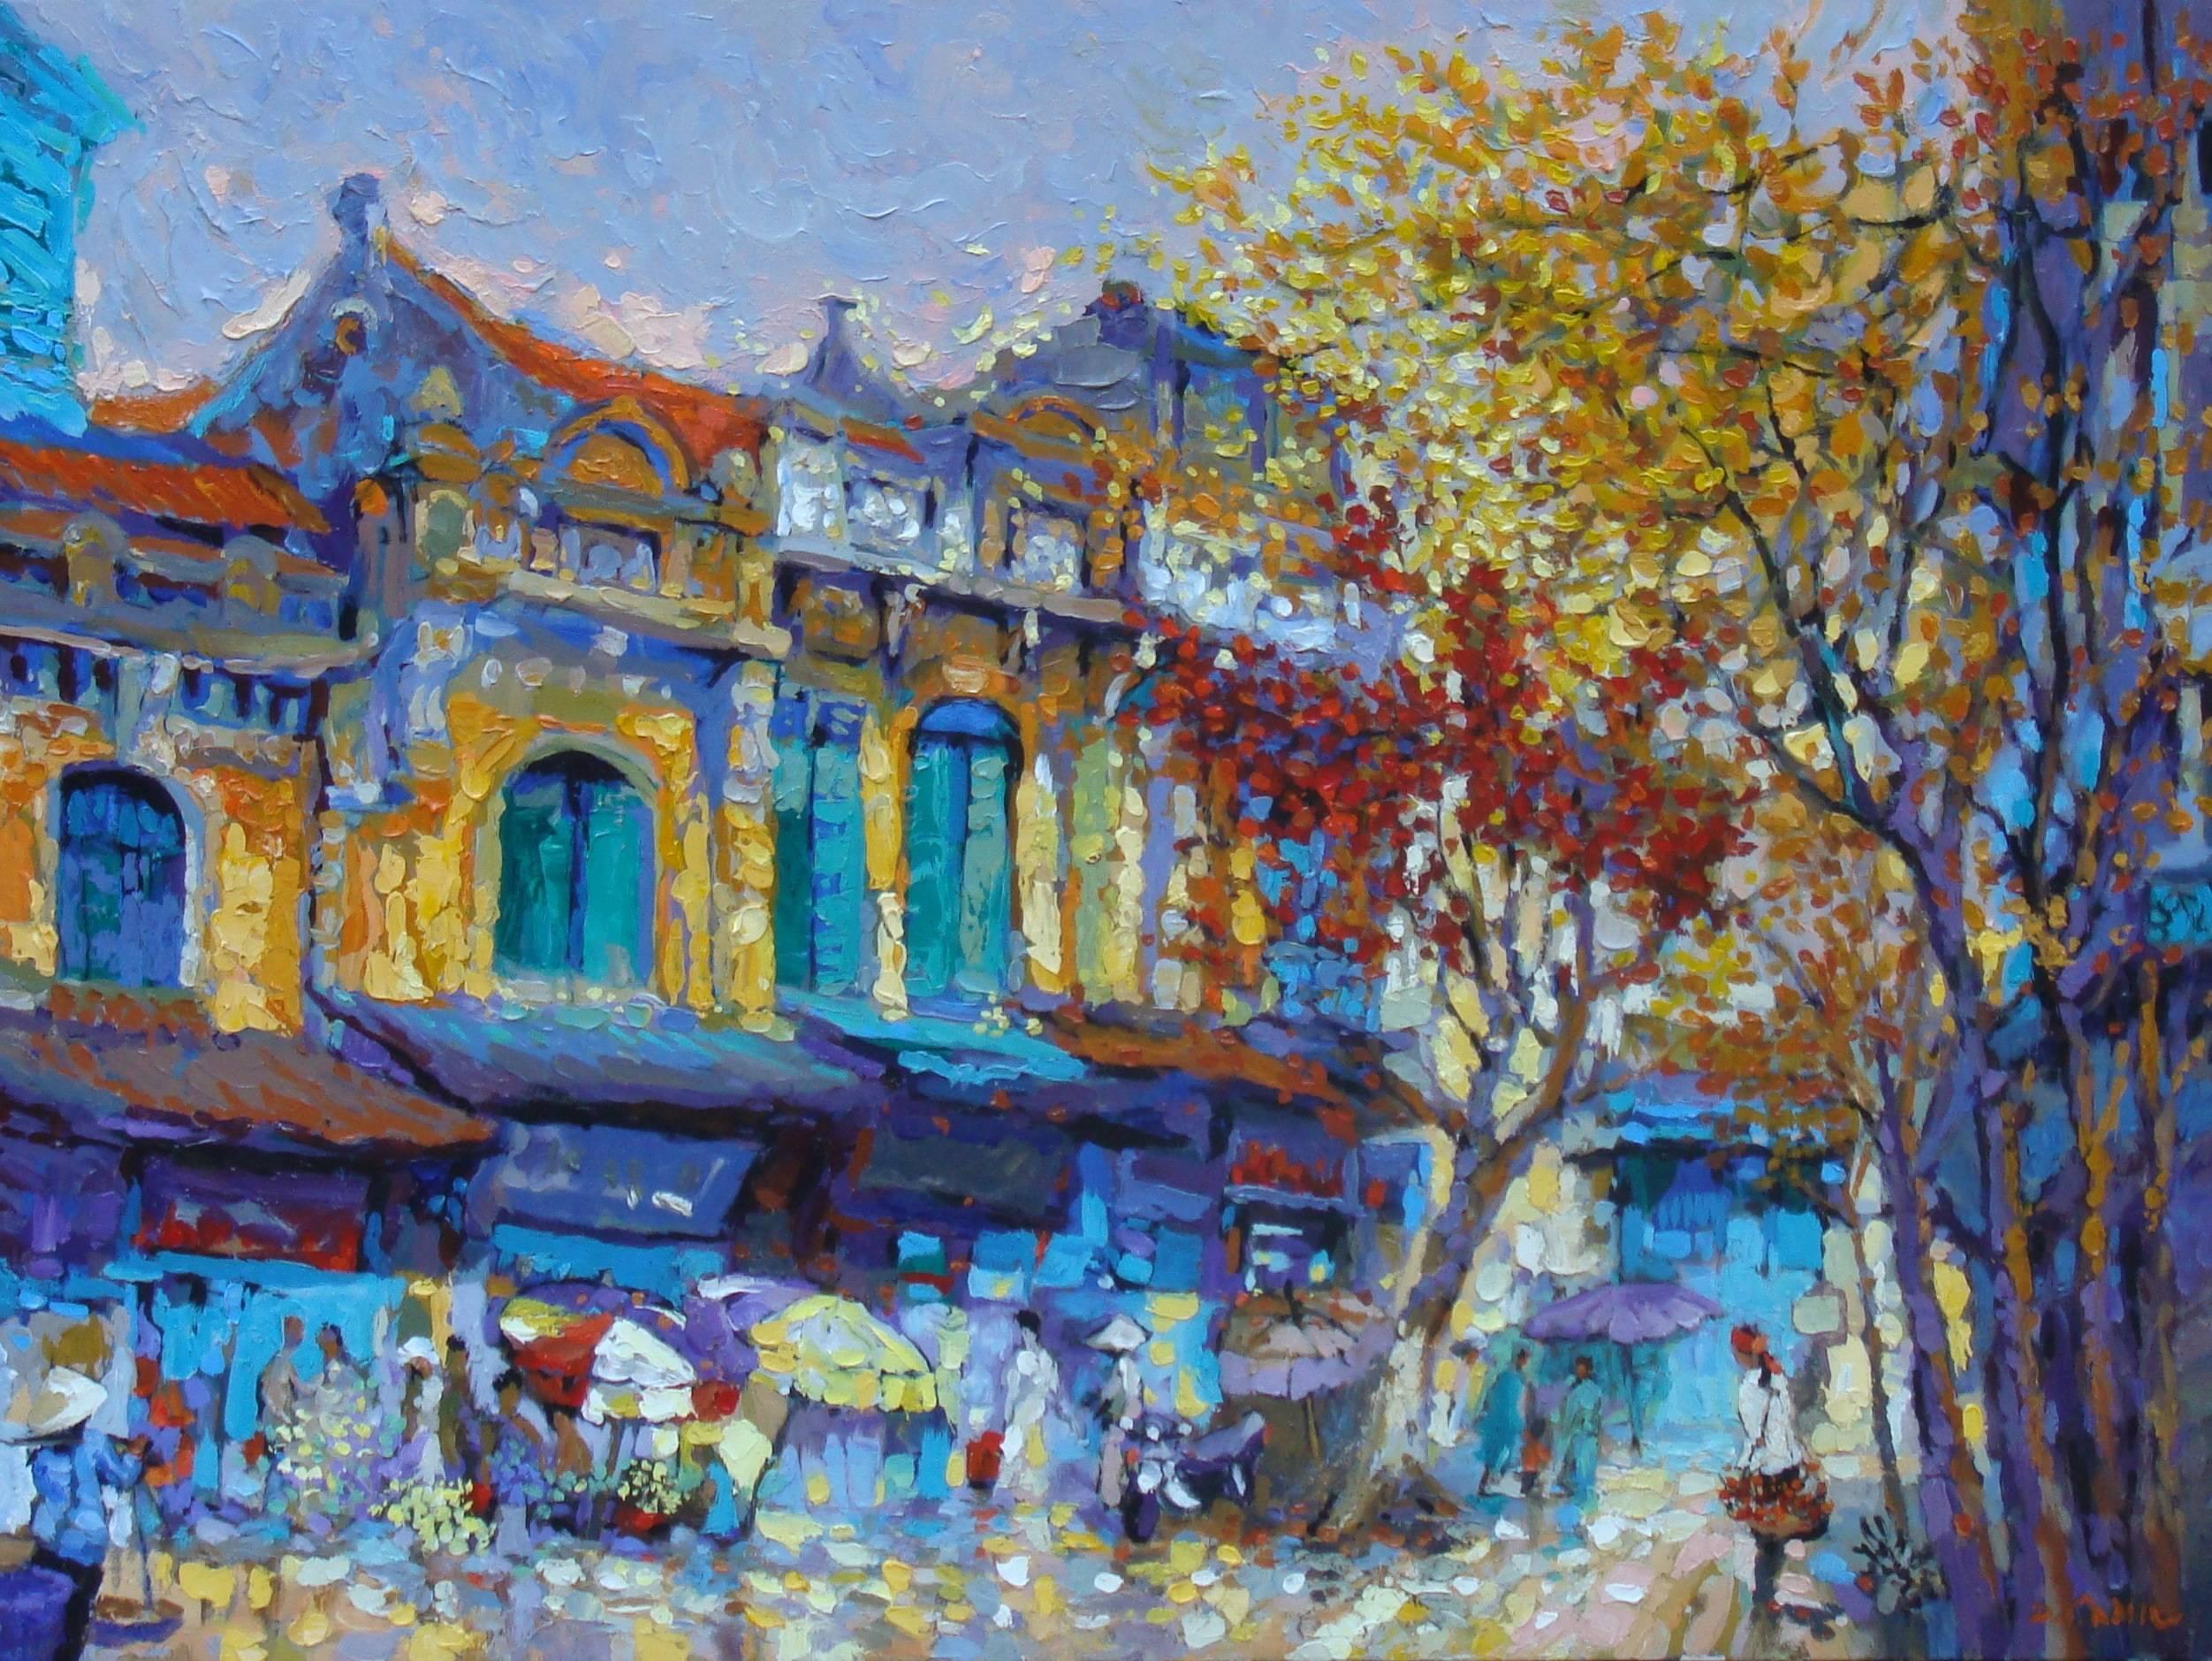 Duong Viet Nam Landscape Painting - 'Spring' Impressionist Oil Painting of a Street Scene